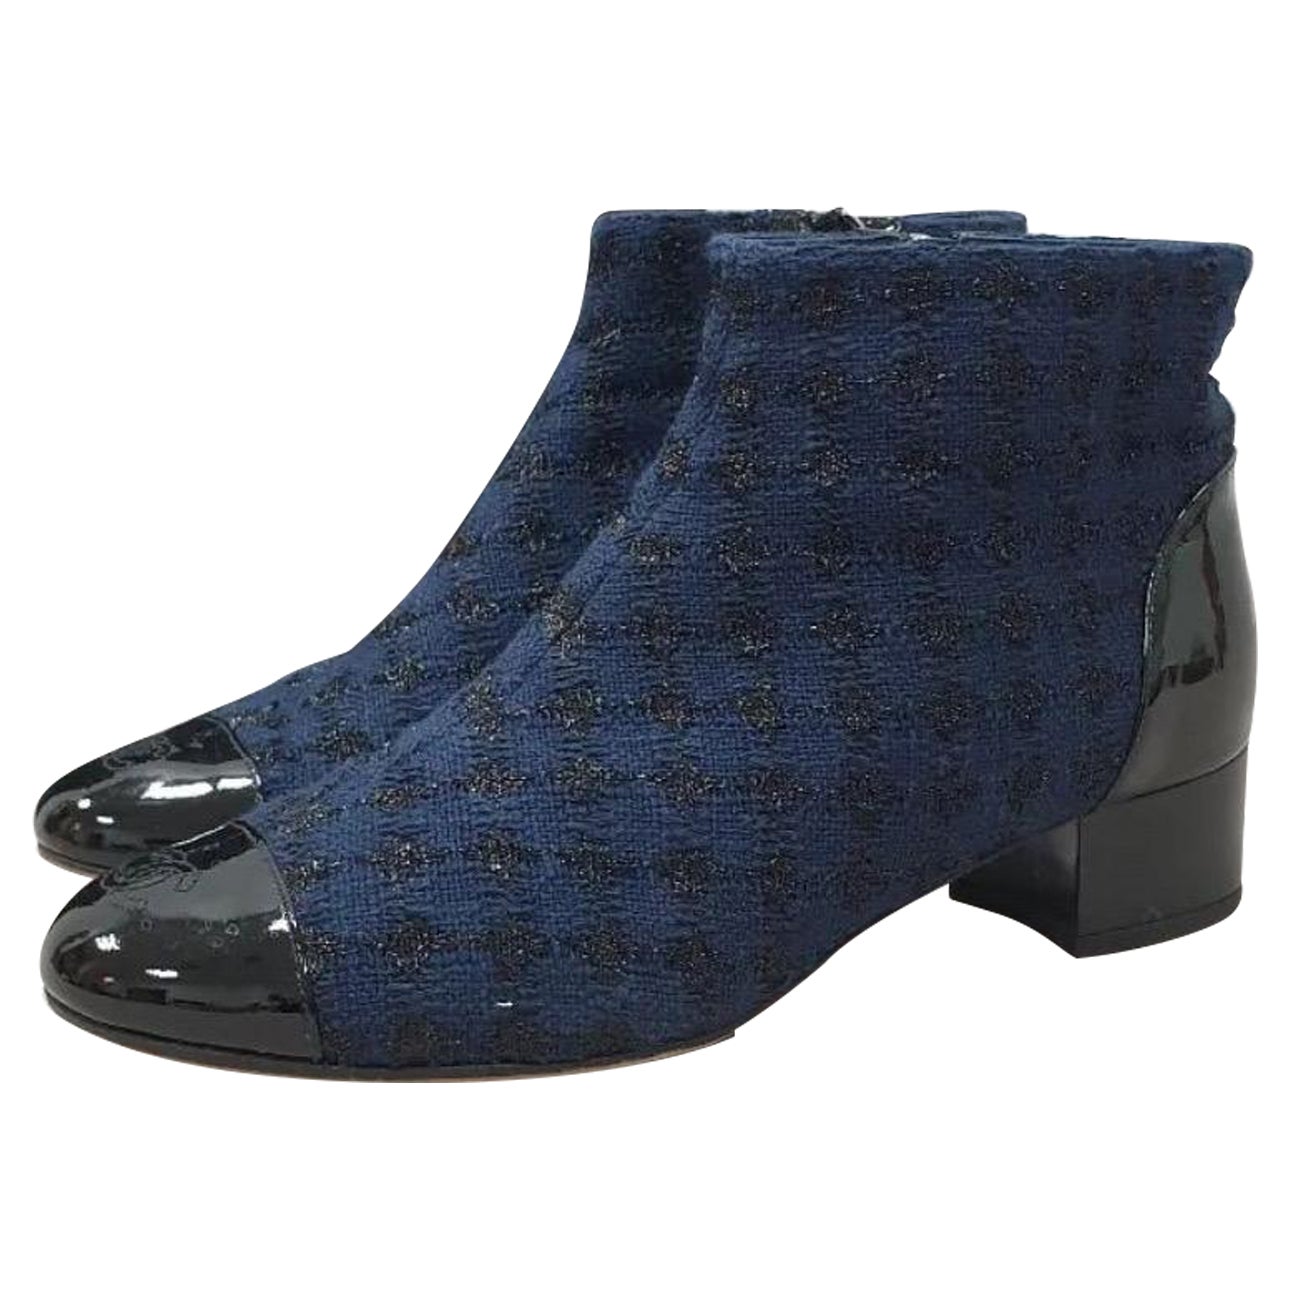 Chanel Tweed Patent Leather Ankle Boots